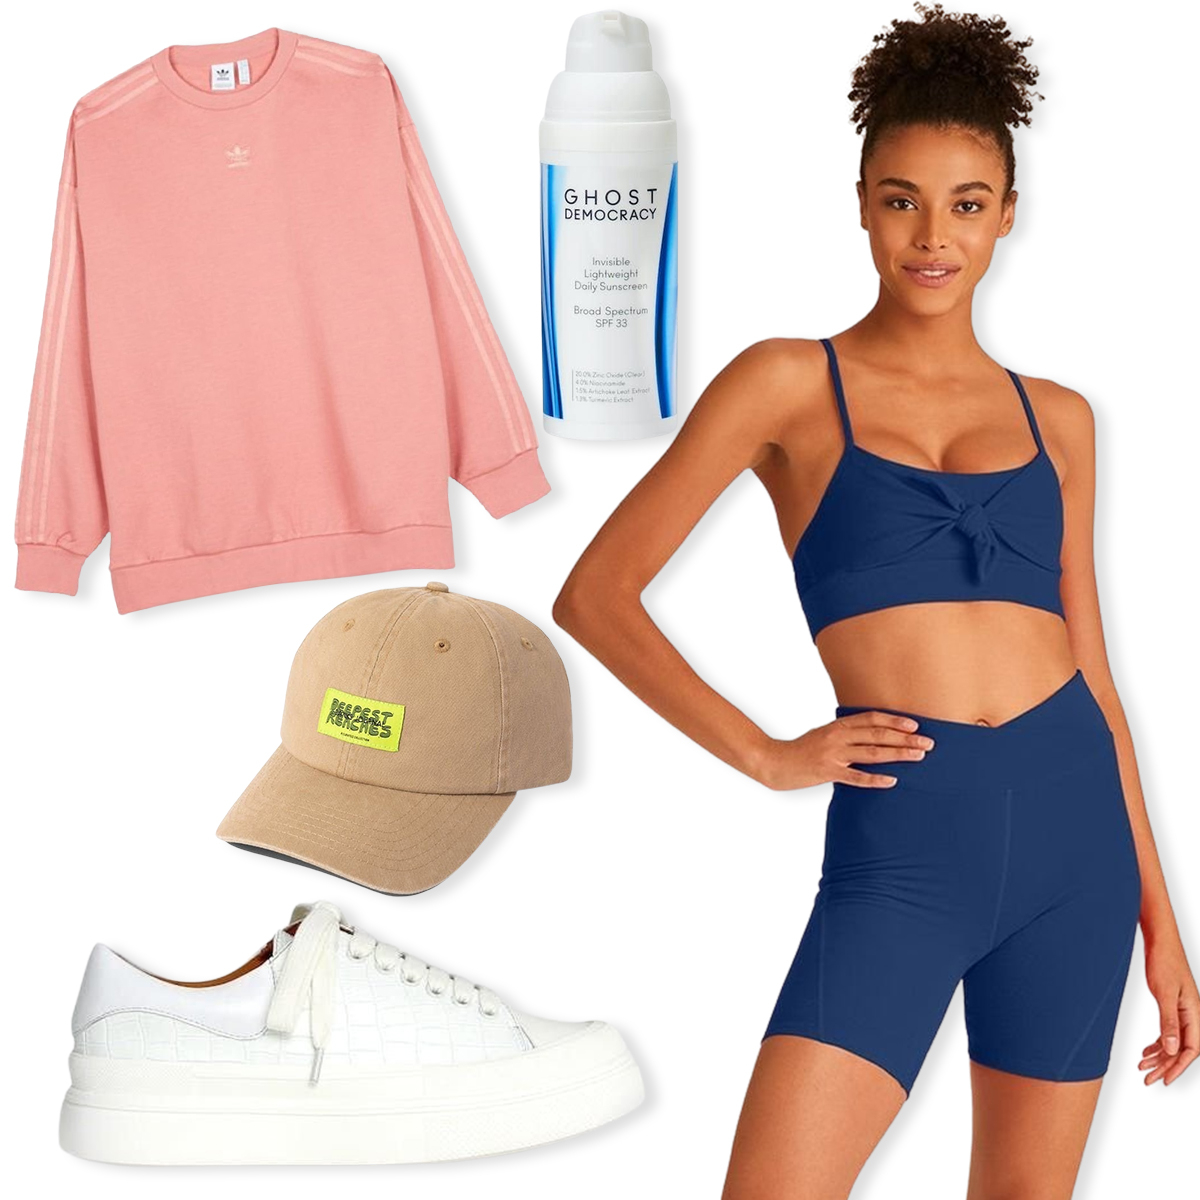 New Year, New Look: 17 Mix-and-Match Must-Haves For The Gym